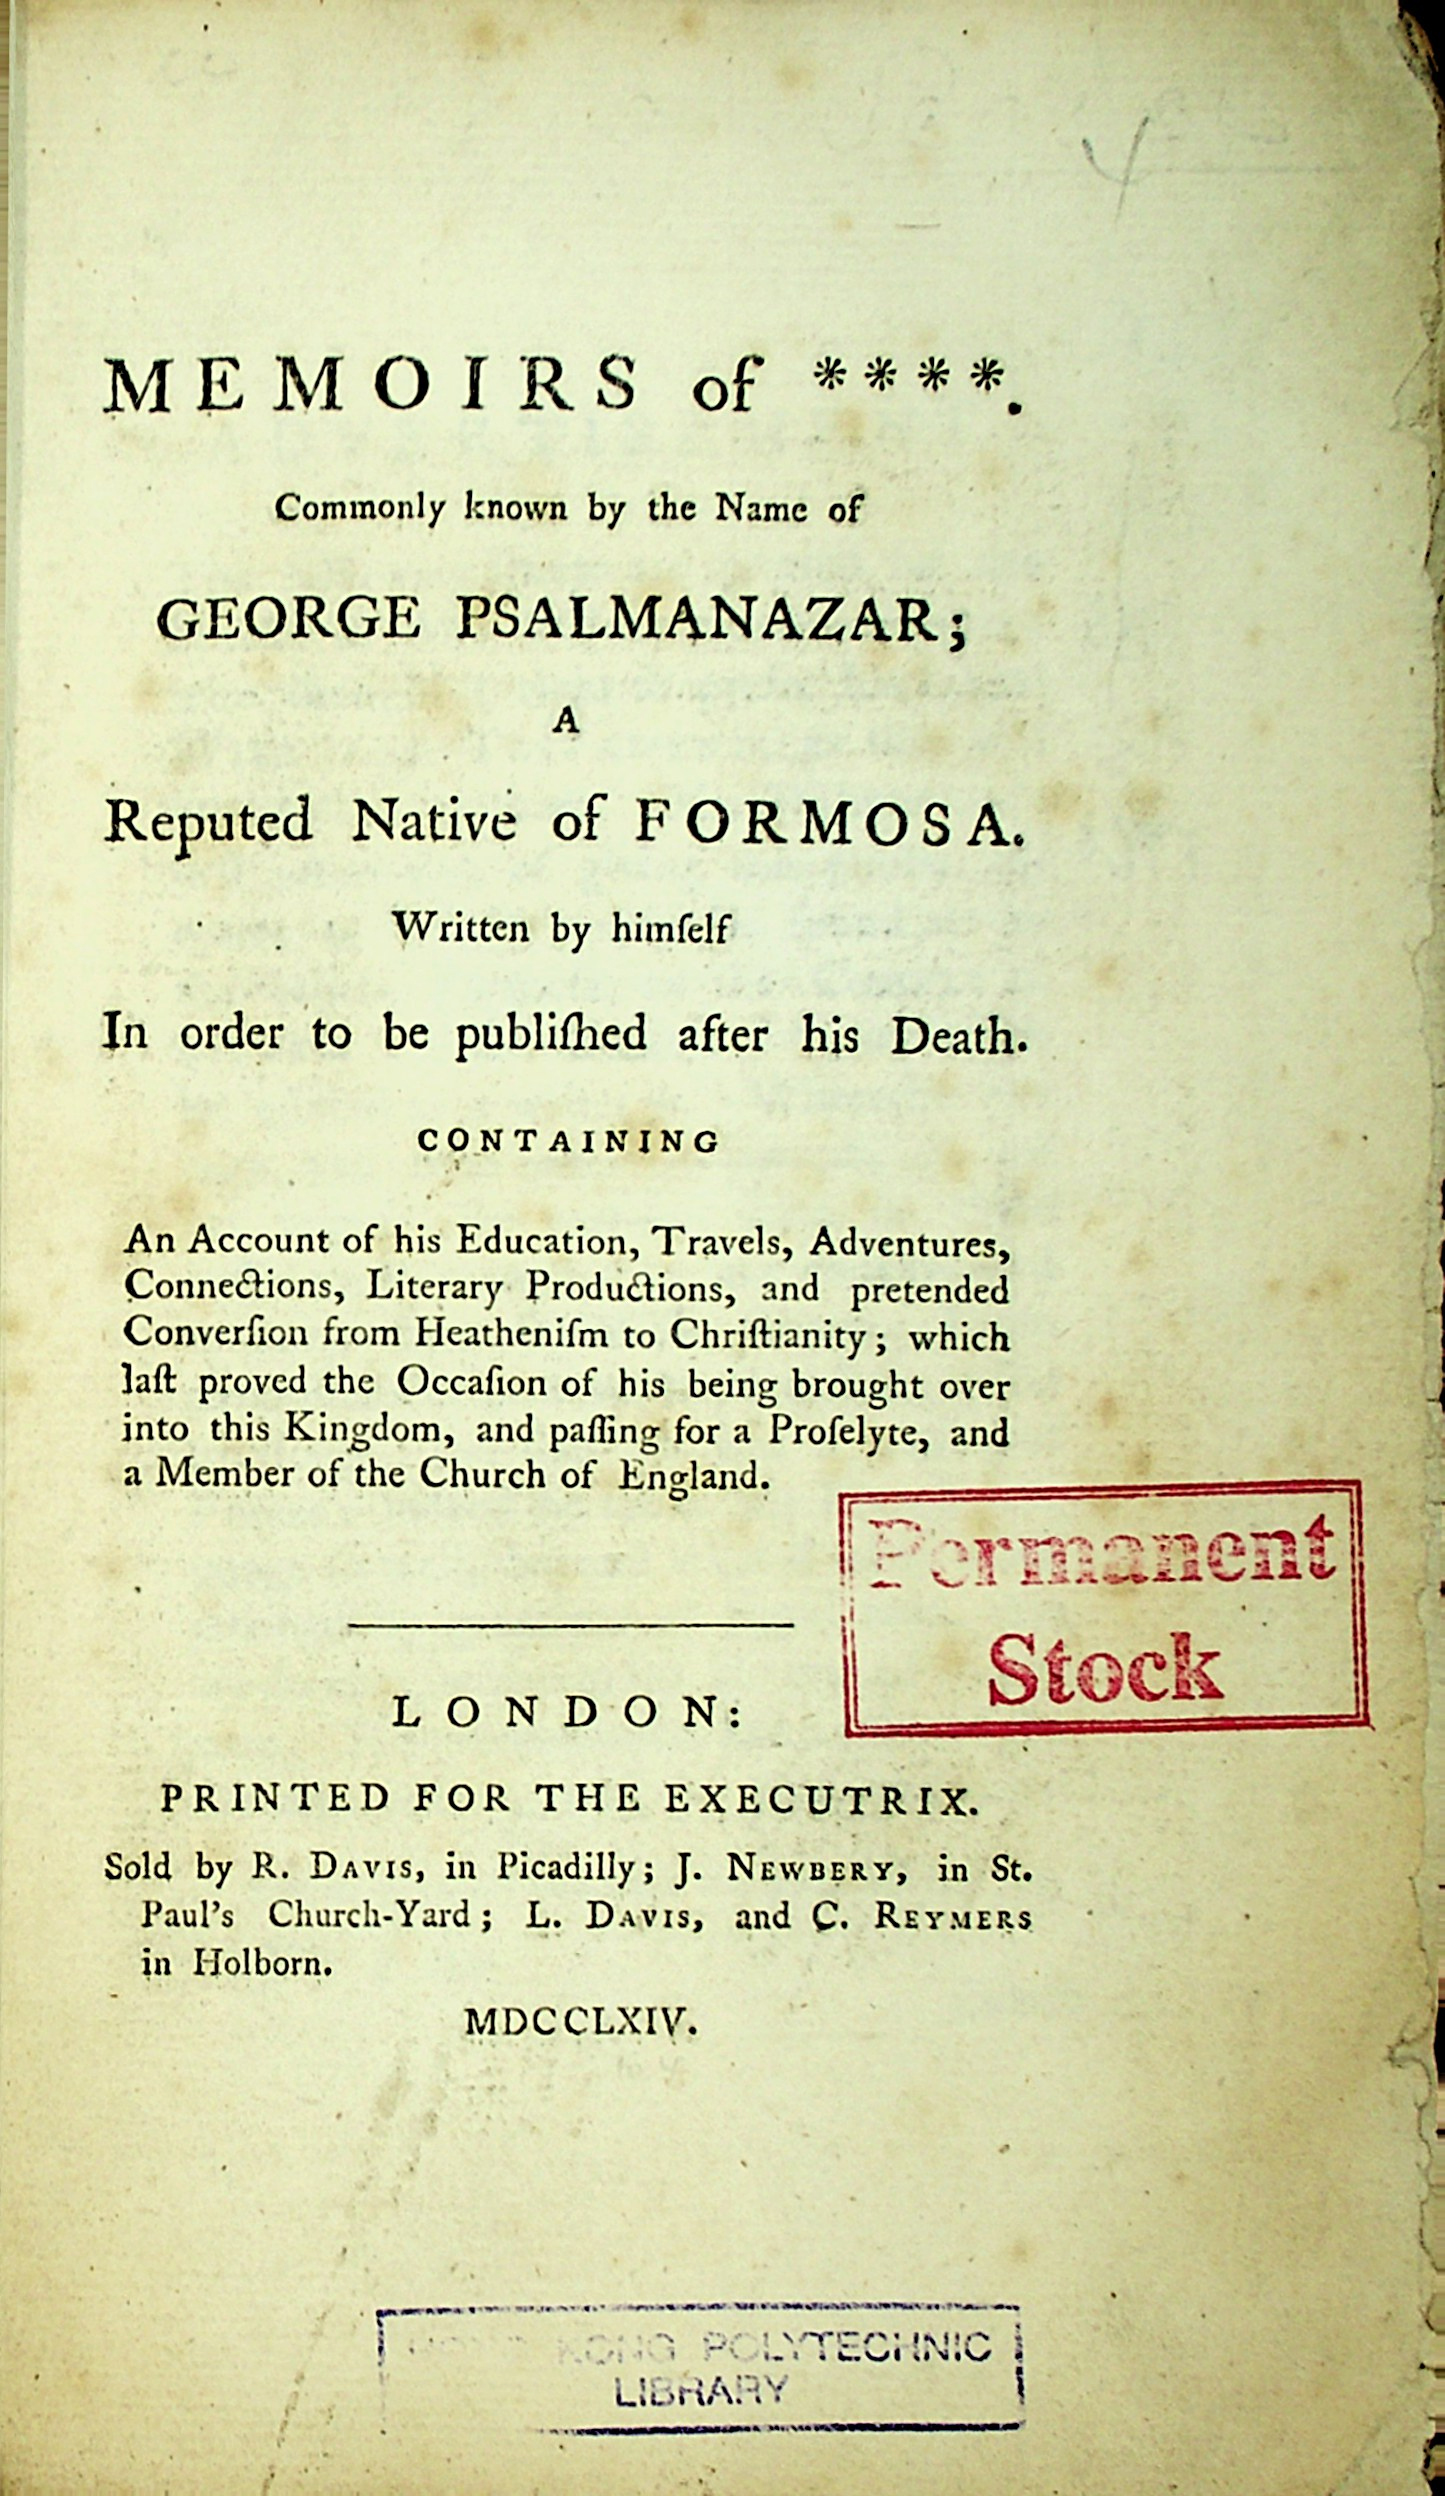 Memoirs of ****. commonly known by the name of George Psalmanazar ; a reputed native of Formosa 